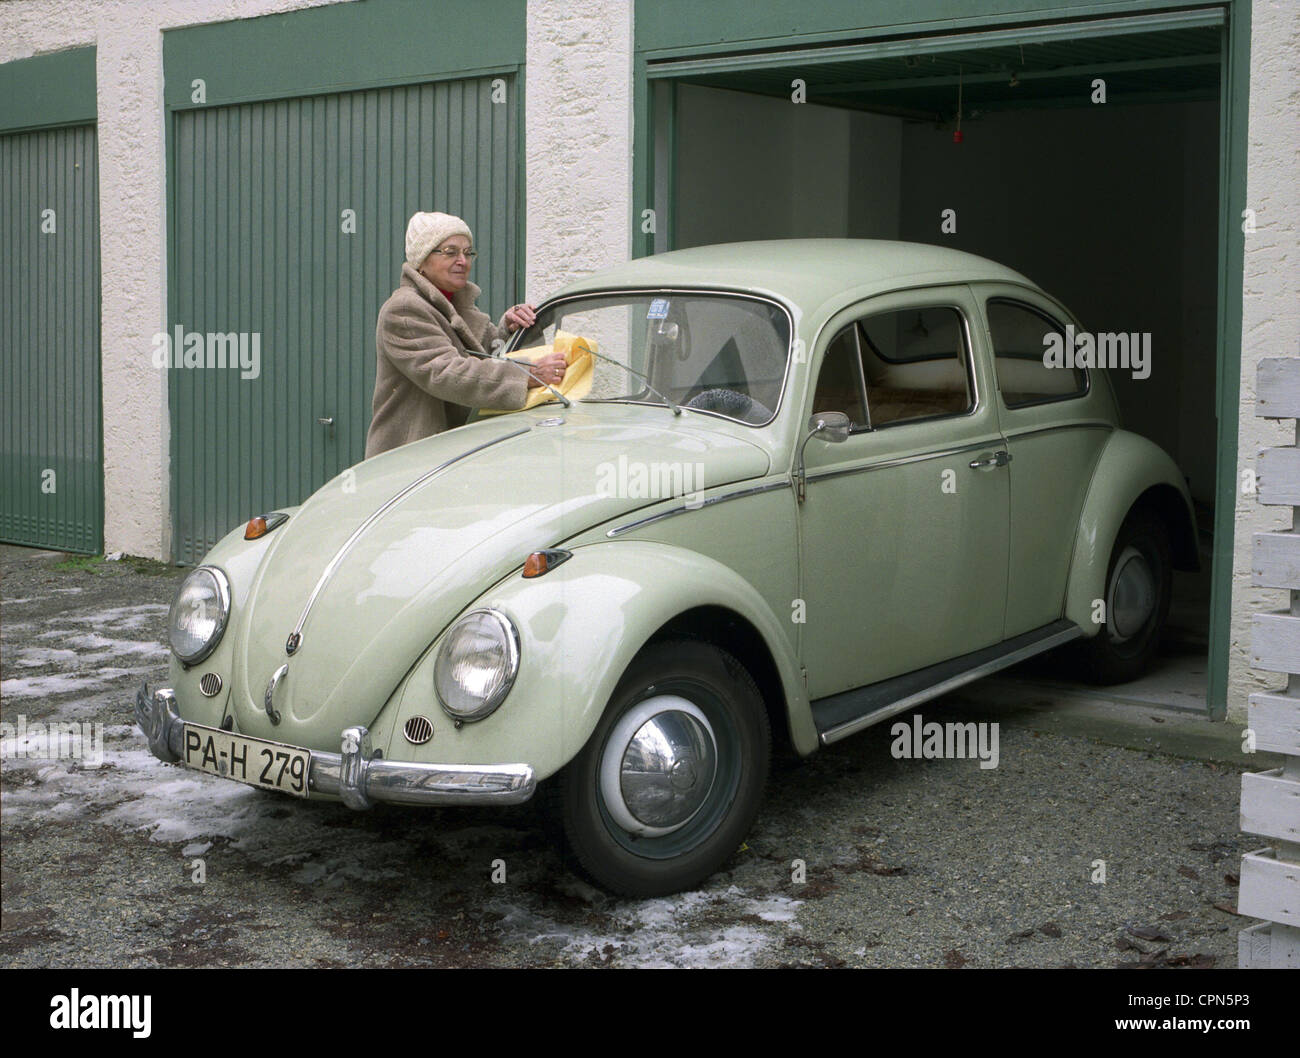 transport / transportation, car, vehicle variants, Volkswagen, VW beetle, owner cleaning the windscreen, have bought the car on 4th May 1960 for 4760 mark, the beetle has a mileage of 250.000 km, Passau, Germany, 6.1.2001, Additional-Rights-Clearences-Not Available Stock Photo